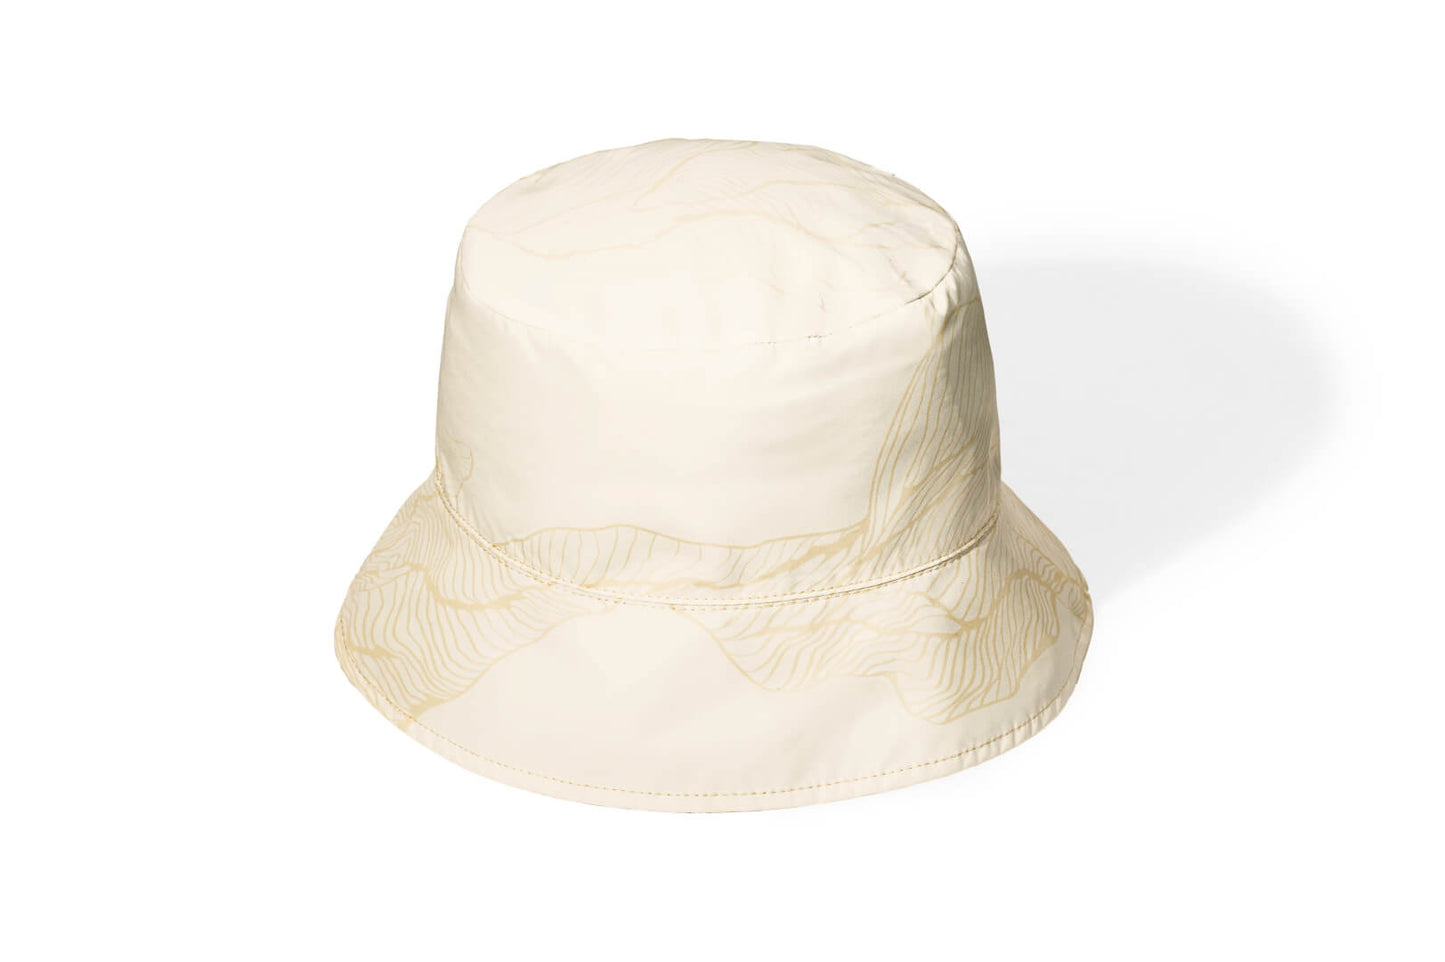 Kish Unisex Reversible Bucket Hat in Premium 3-Ply Micro Denier and 4-Way Durable Stretch Weave fabrications, with one side tonal and reverse printed, in Wheat Desert/Wheat